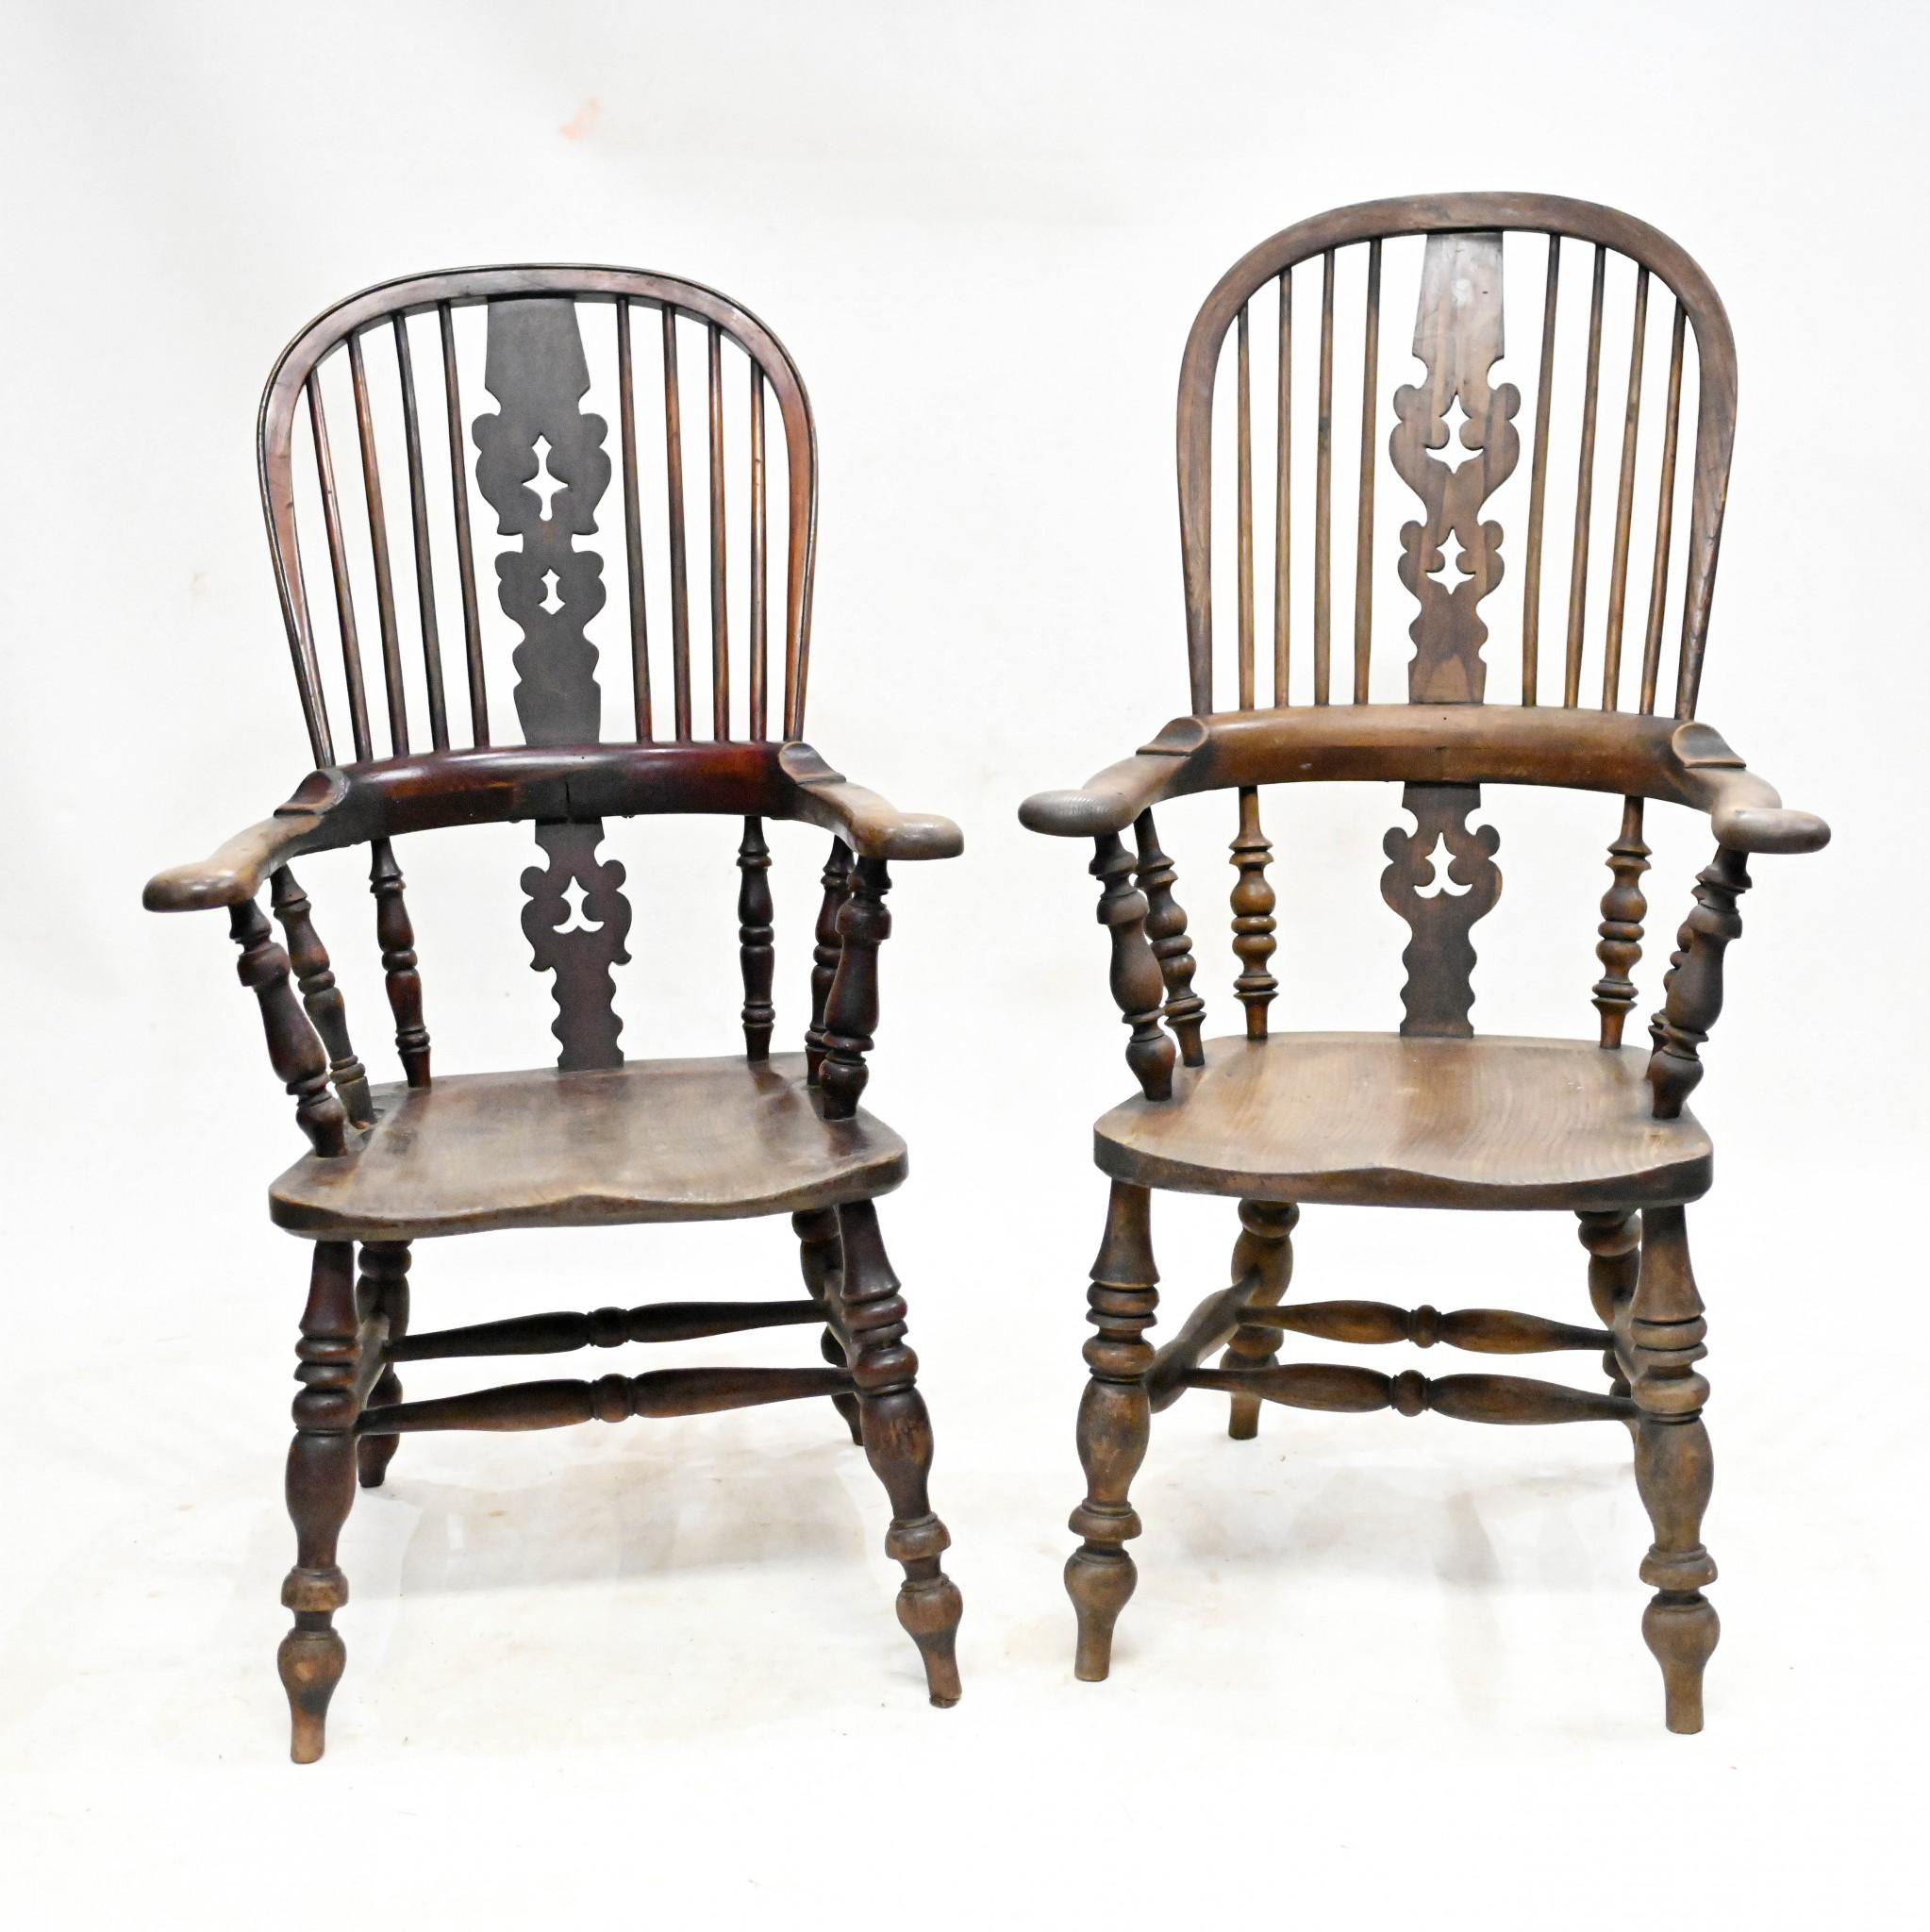 A pair of broad armed Windsor chairs in oak with elm seats
Probably a his and hers set
Circa 1860
Very solid and sturdy, great pair of farmhouse accent chairs
Bought from a house sale from a private residence on London's Bloomsbury
Historically, the